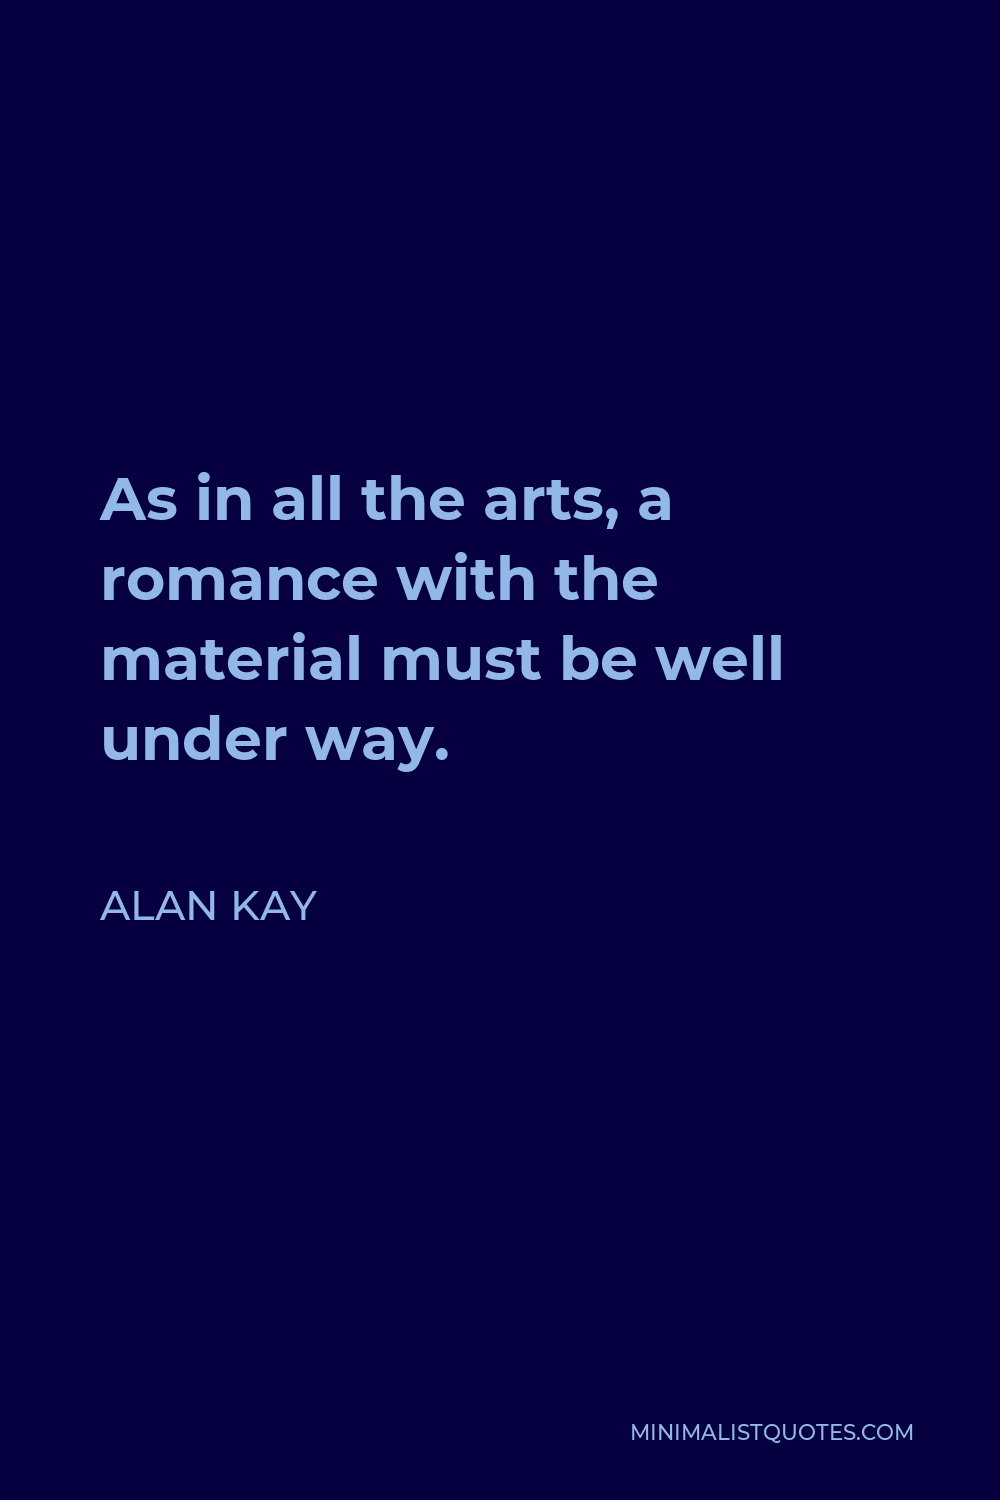 Alan Kay Quote - As in all the arts, a romance with the material must be well under way.